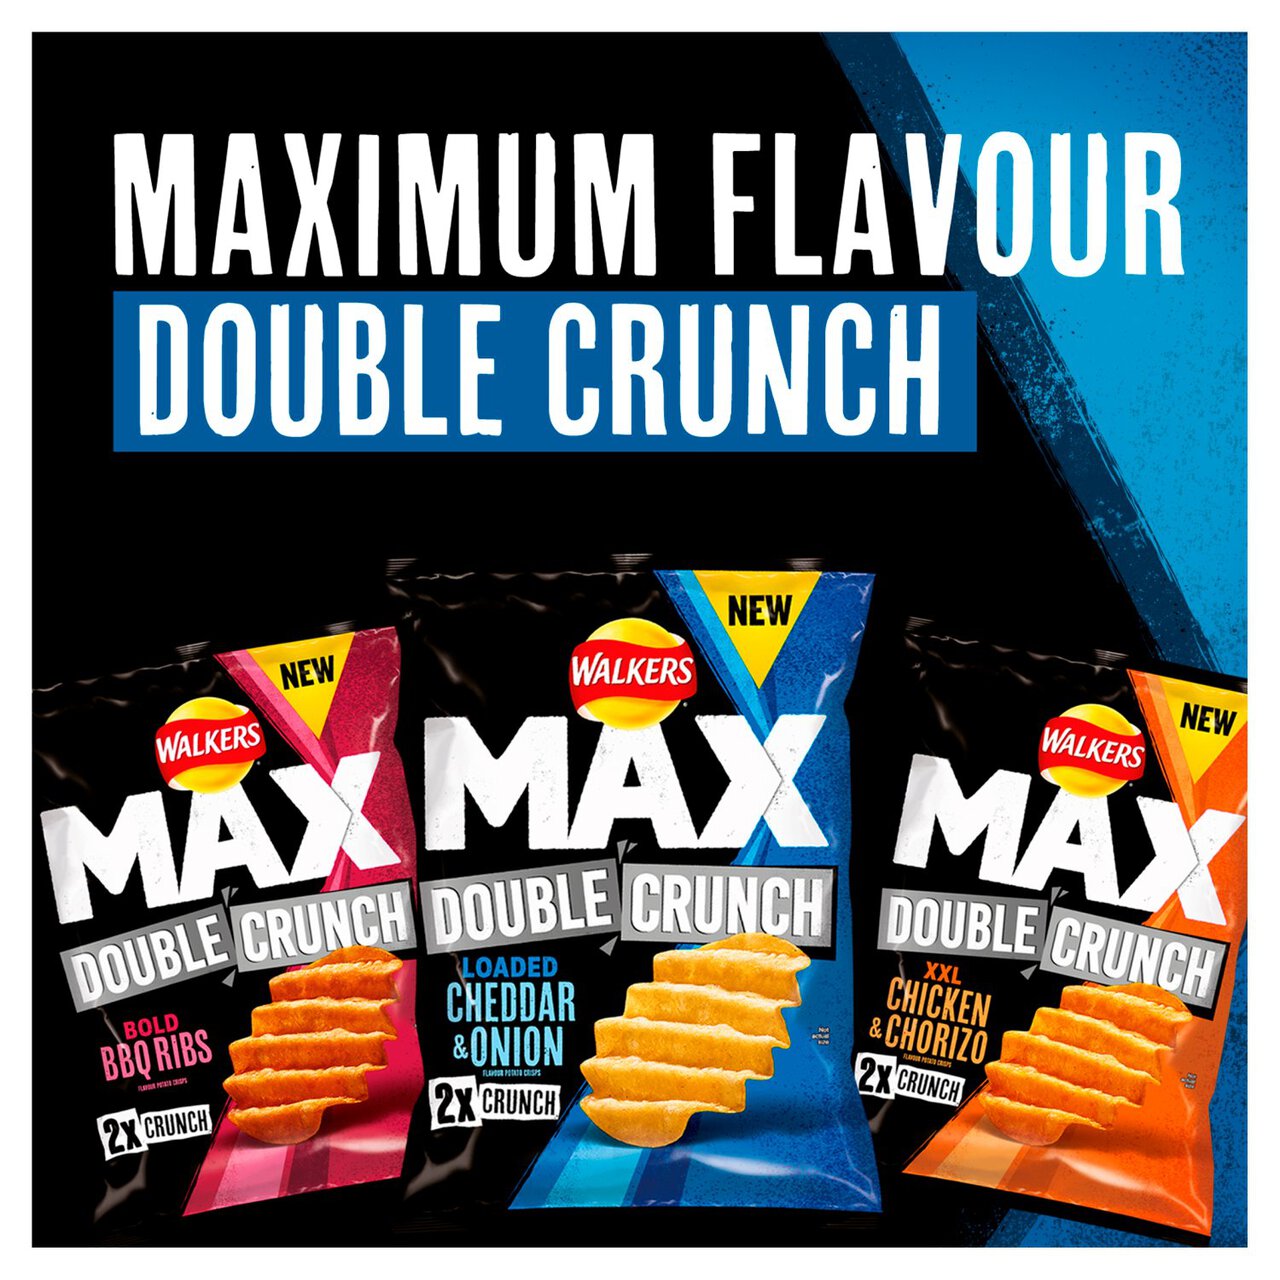 Walkers Max Double Crunch Cheddar & Onion Sharing Crisps 140g